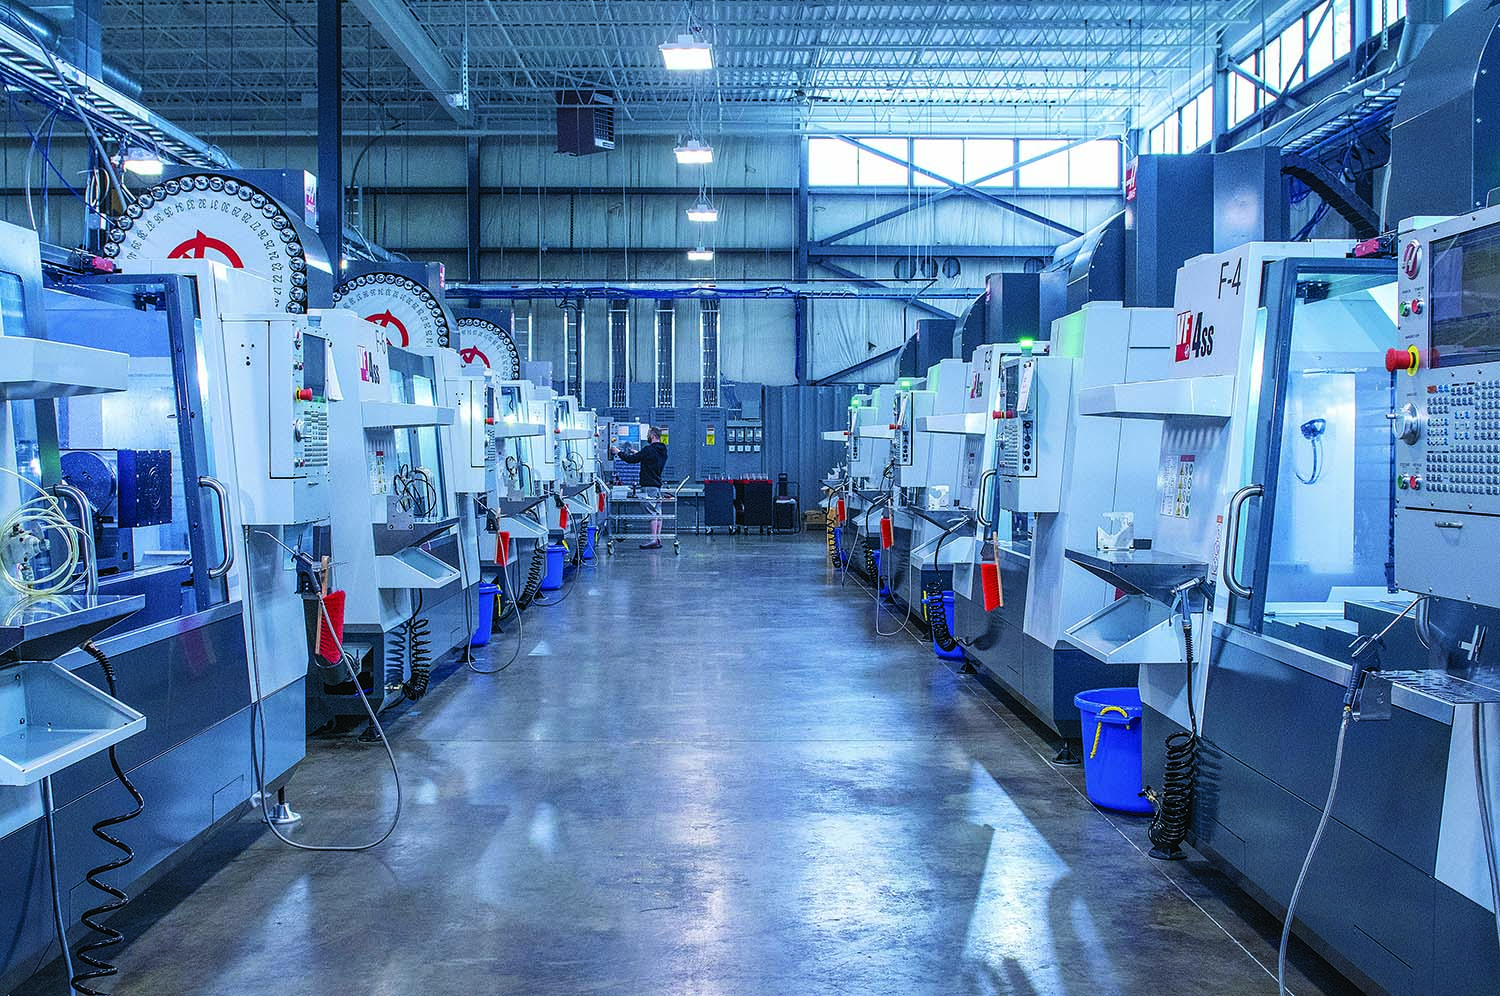 Operators at Protolabs’ largest CNC machining facility can run multiple machines, thanks to physical and software error-proofing techniques aimed at ensuring repeatable processes and quality levels.